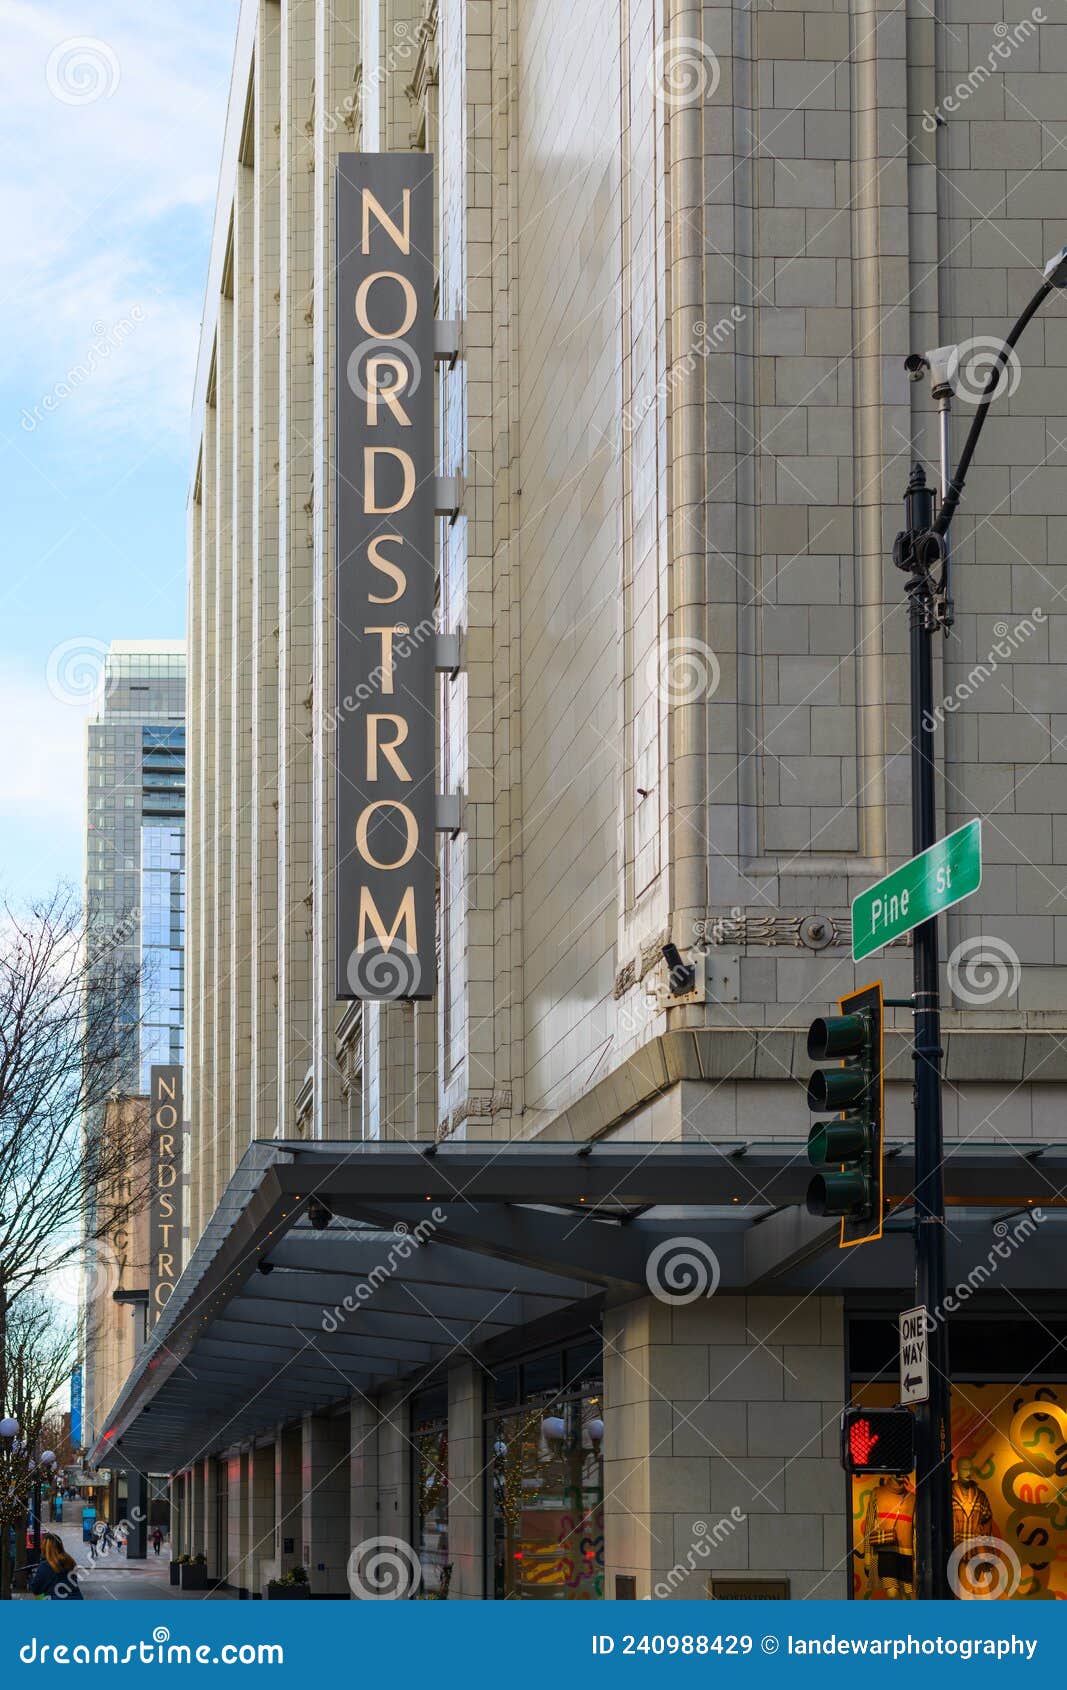 Nordstrom Downtown Seattle department store in Seattle, Washington